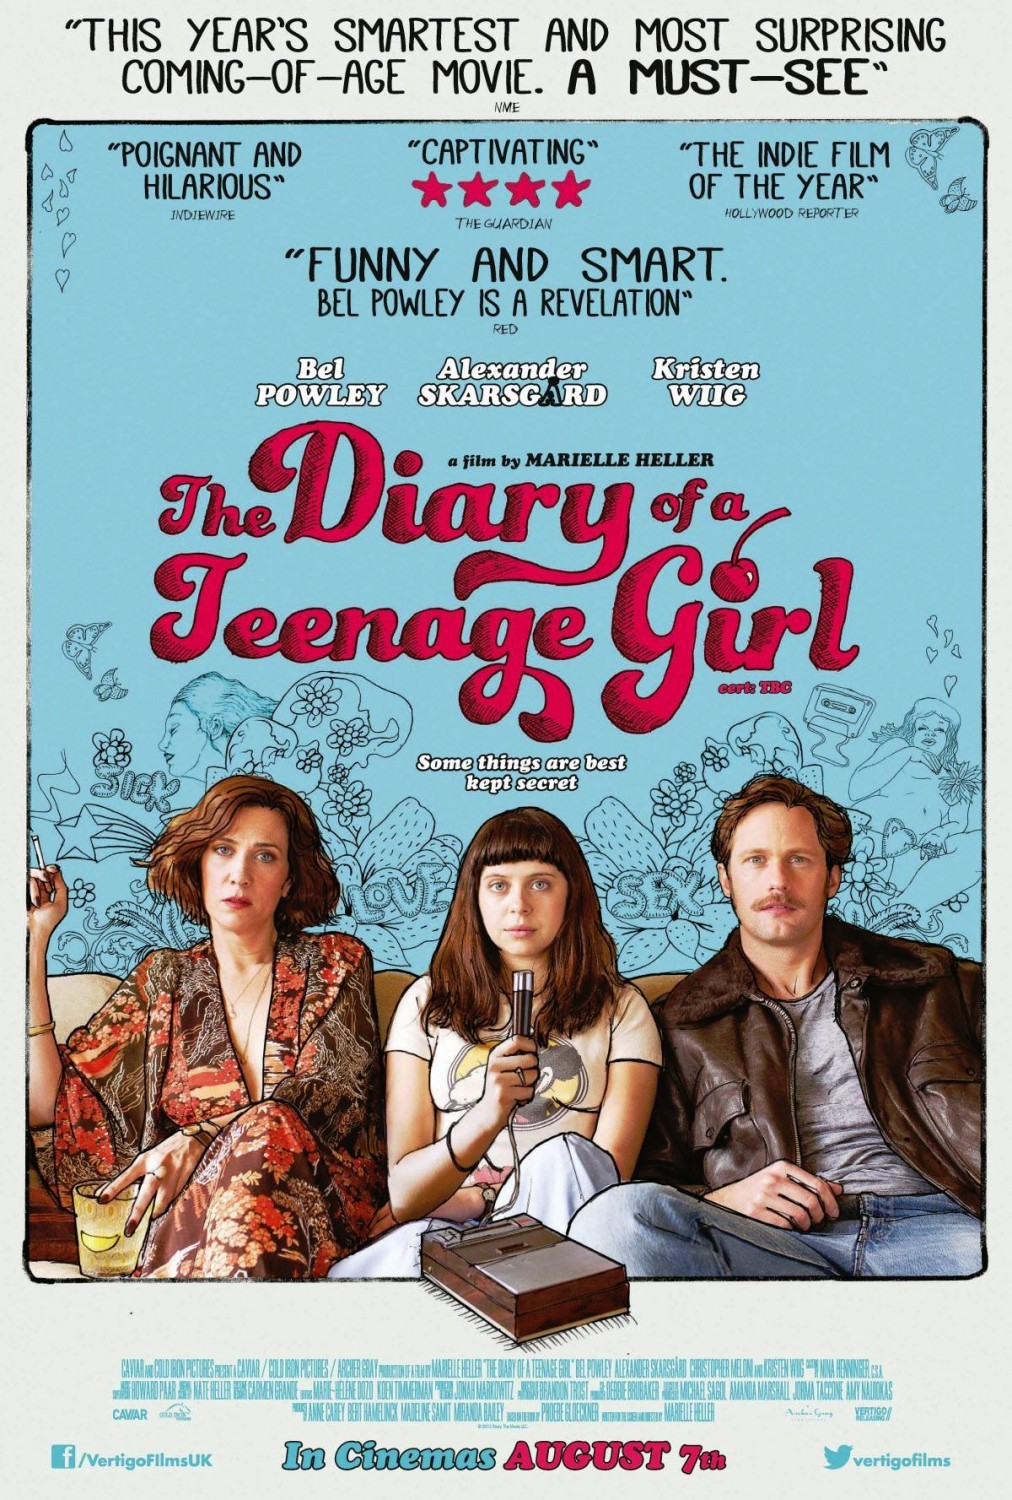 Poster of Sony Pictures Classics' The Diary of a Teenage Girl (2015)